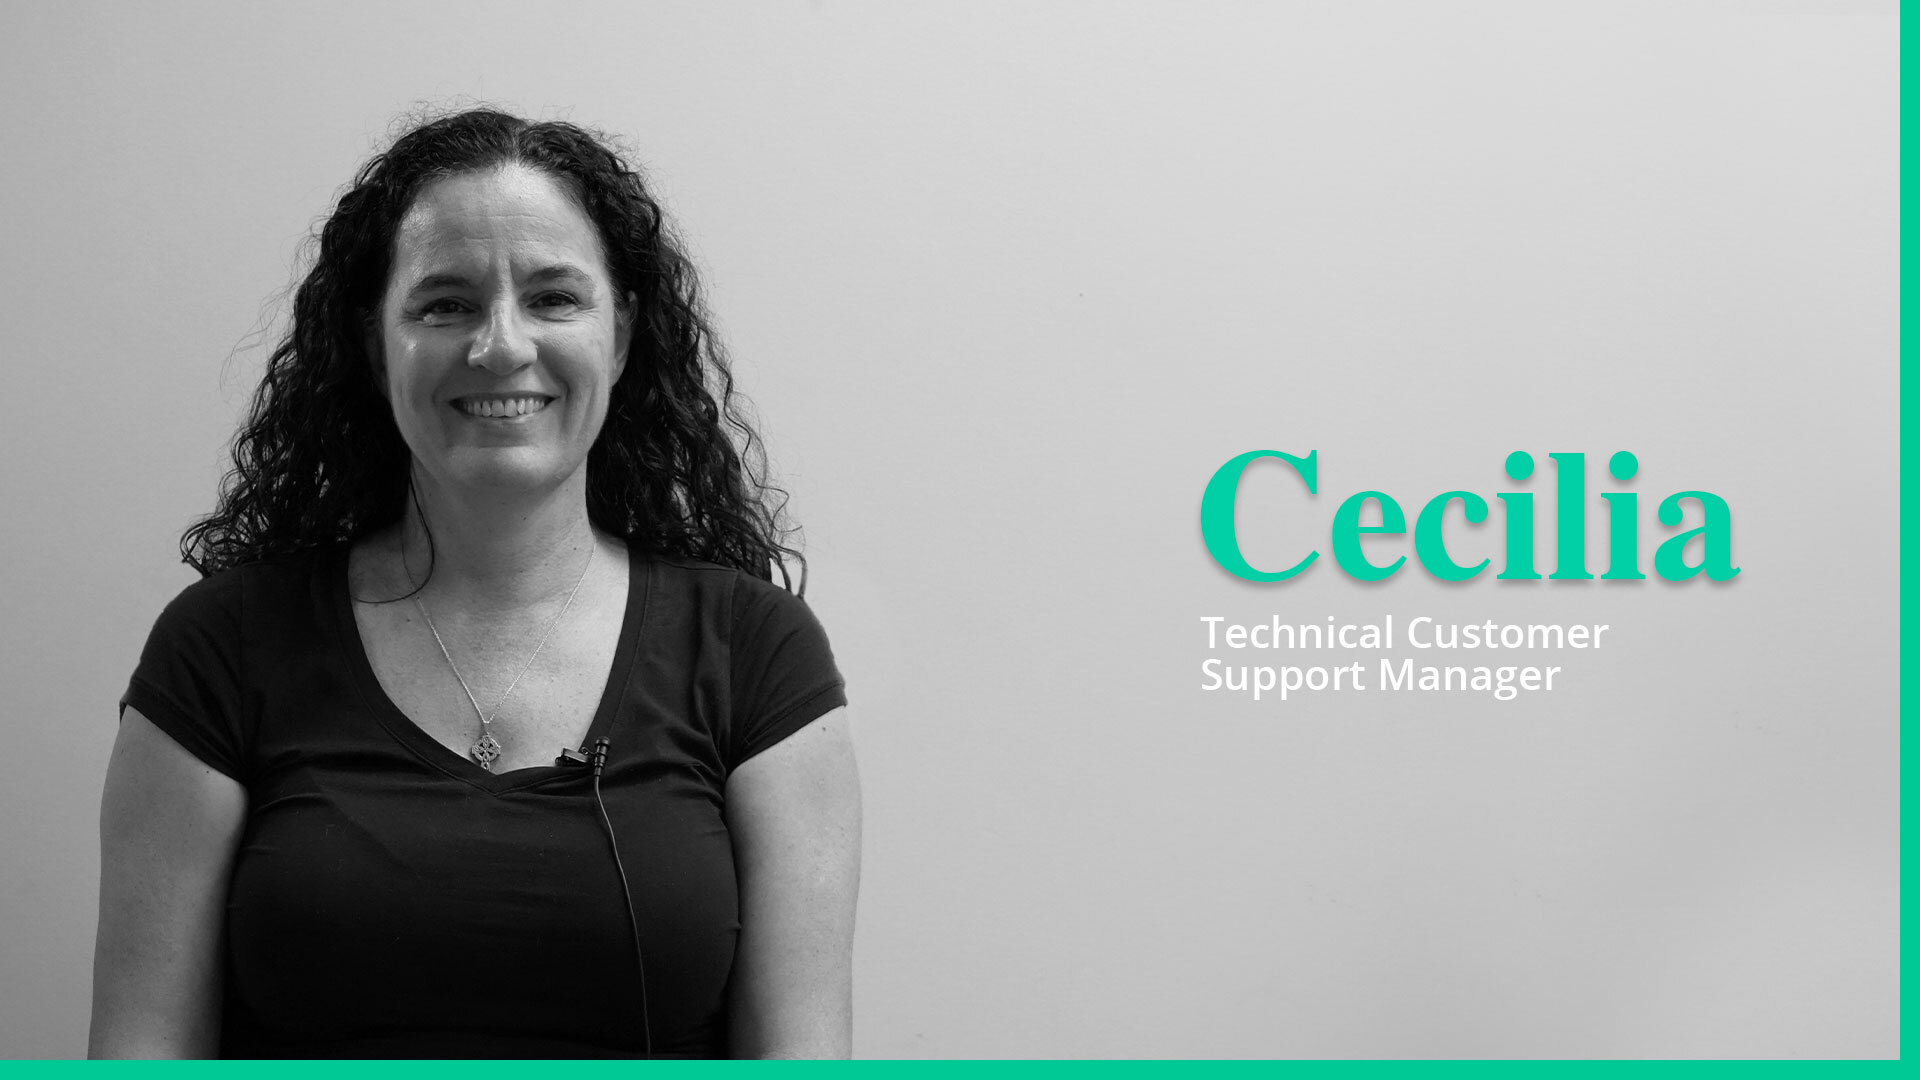 Cecilia loves Solace’s ability to provide world class support